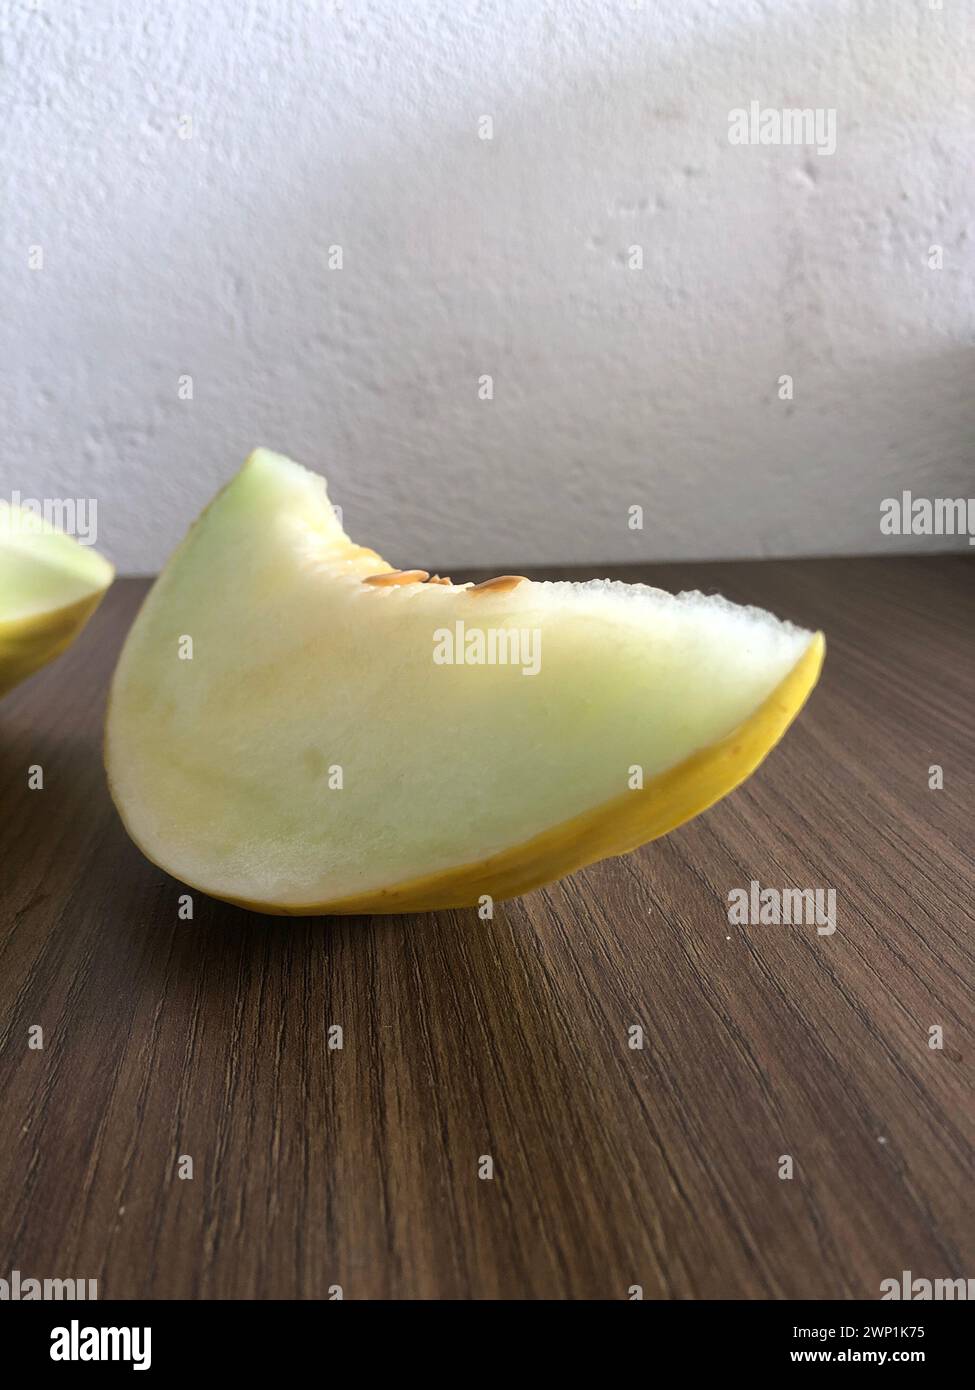 Ripe and fresh melon cut on wooden background with copy space. Cantaloupe or cantaloupe (Cucumis melo) on wooden table background. Favorite fruit Stock Photo